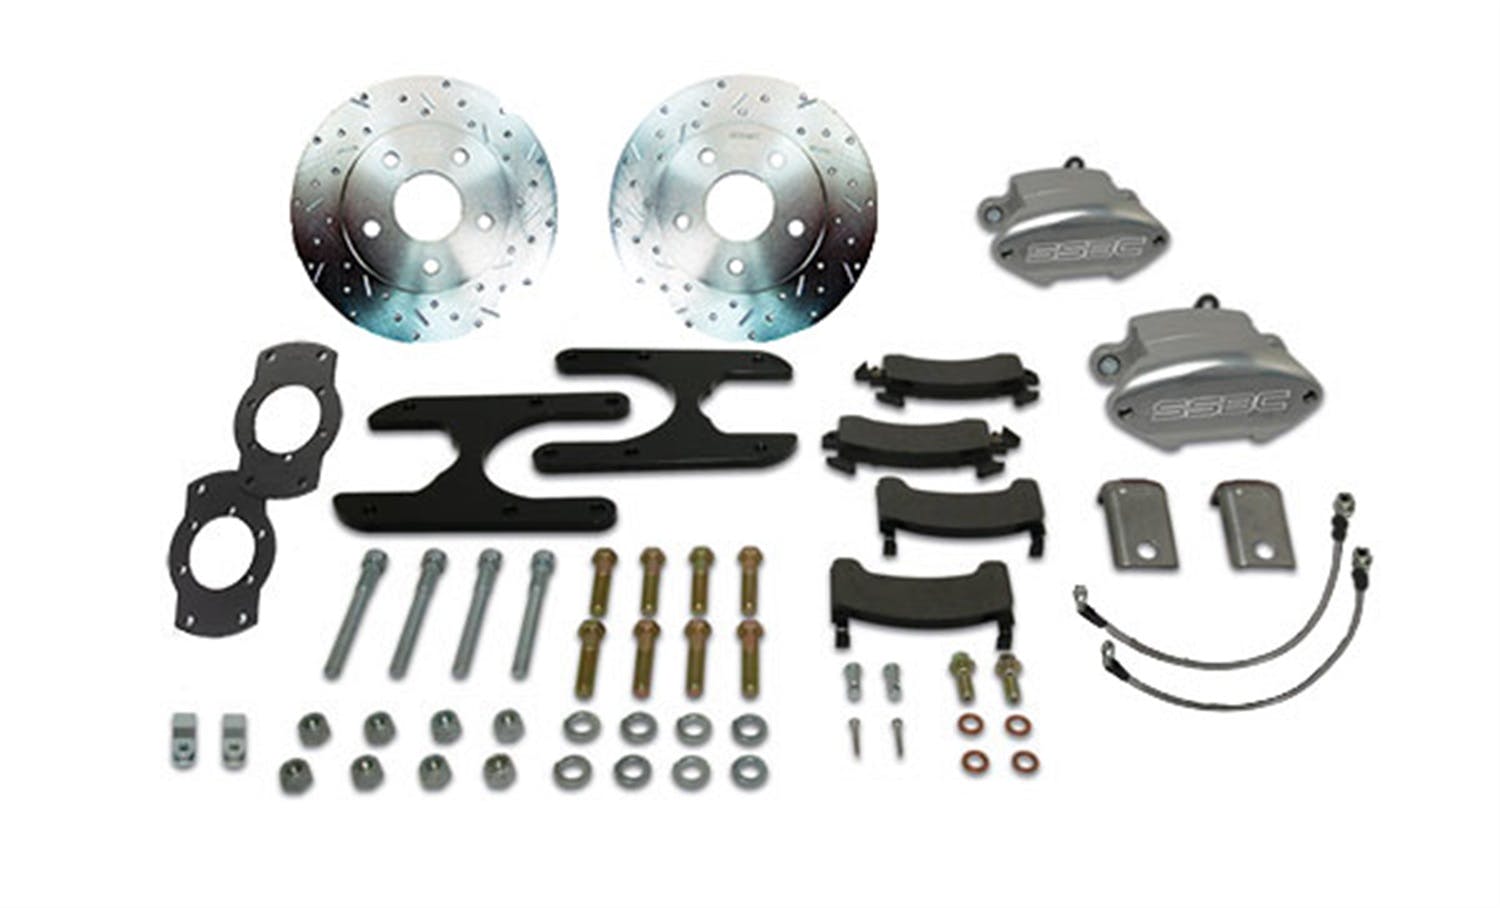 Stainless Steel Brakes W125-26R Kit W125-26 w/red calipers